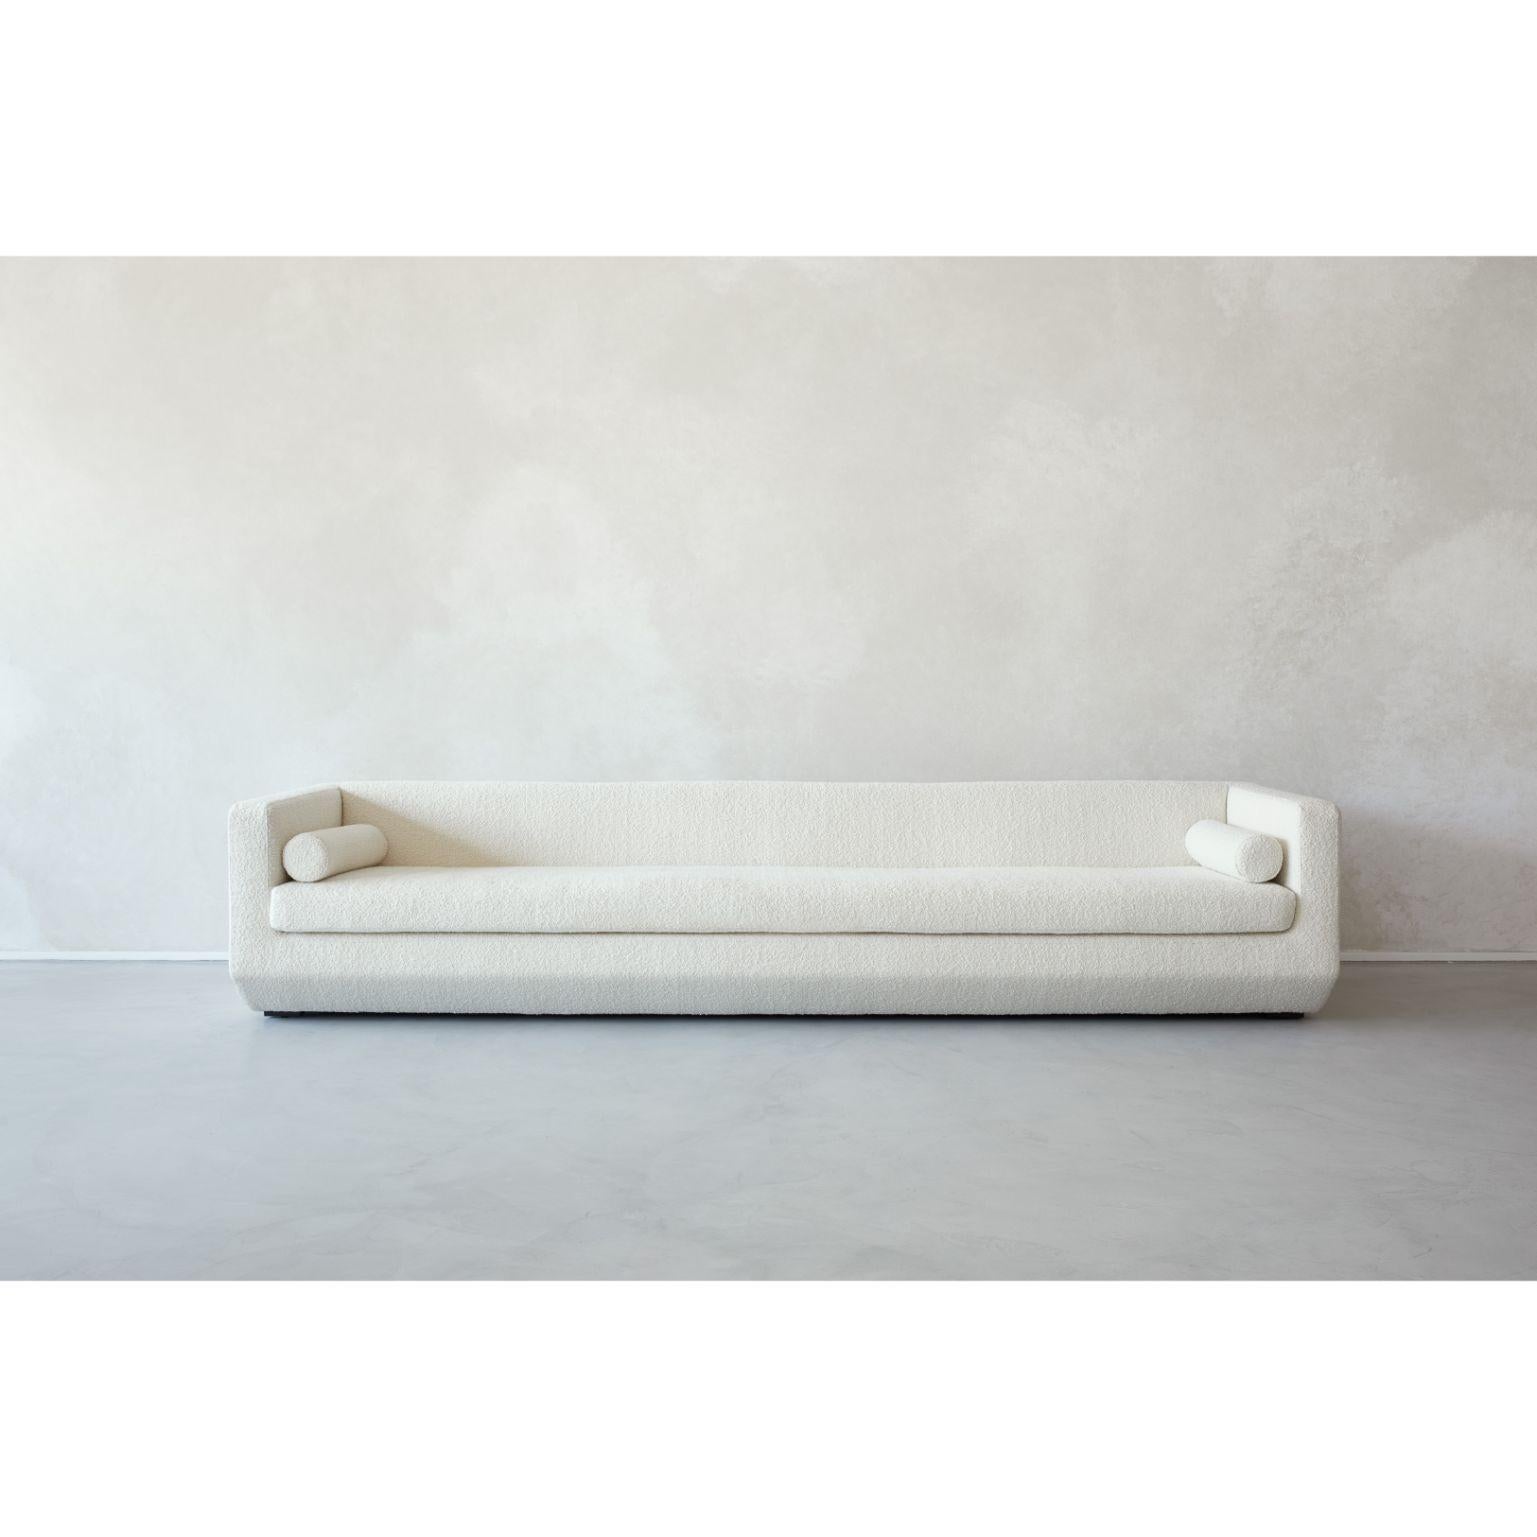 Large Beveled - Couch by Marc Dibeh
2021
Materials: Fabric
Dimensions: W 300 x H 63 x D 80 cm 

Also Available: Large

Beirut based designer Marc Dibeh narrates his cultural environment through compelling interiors and products.
His studio’s